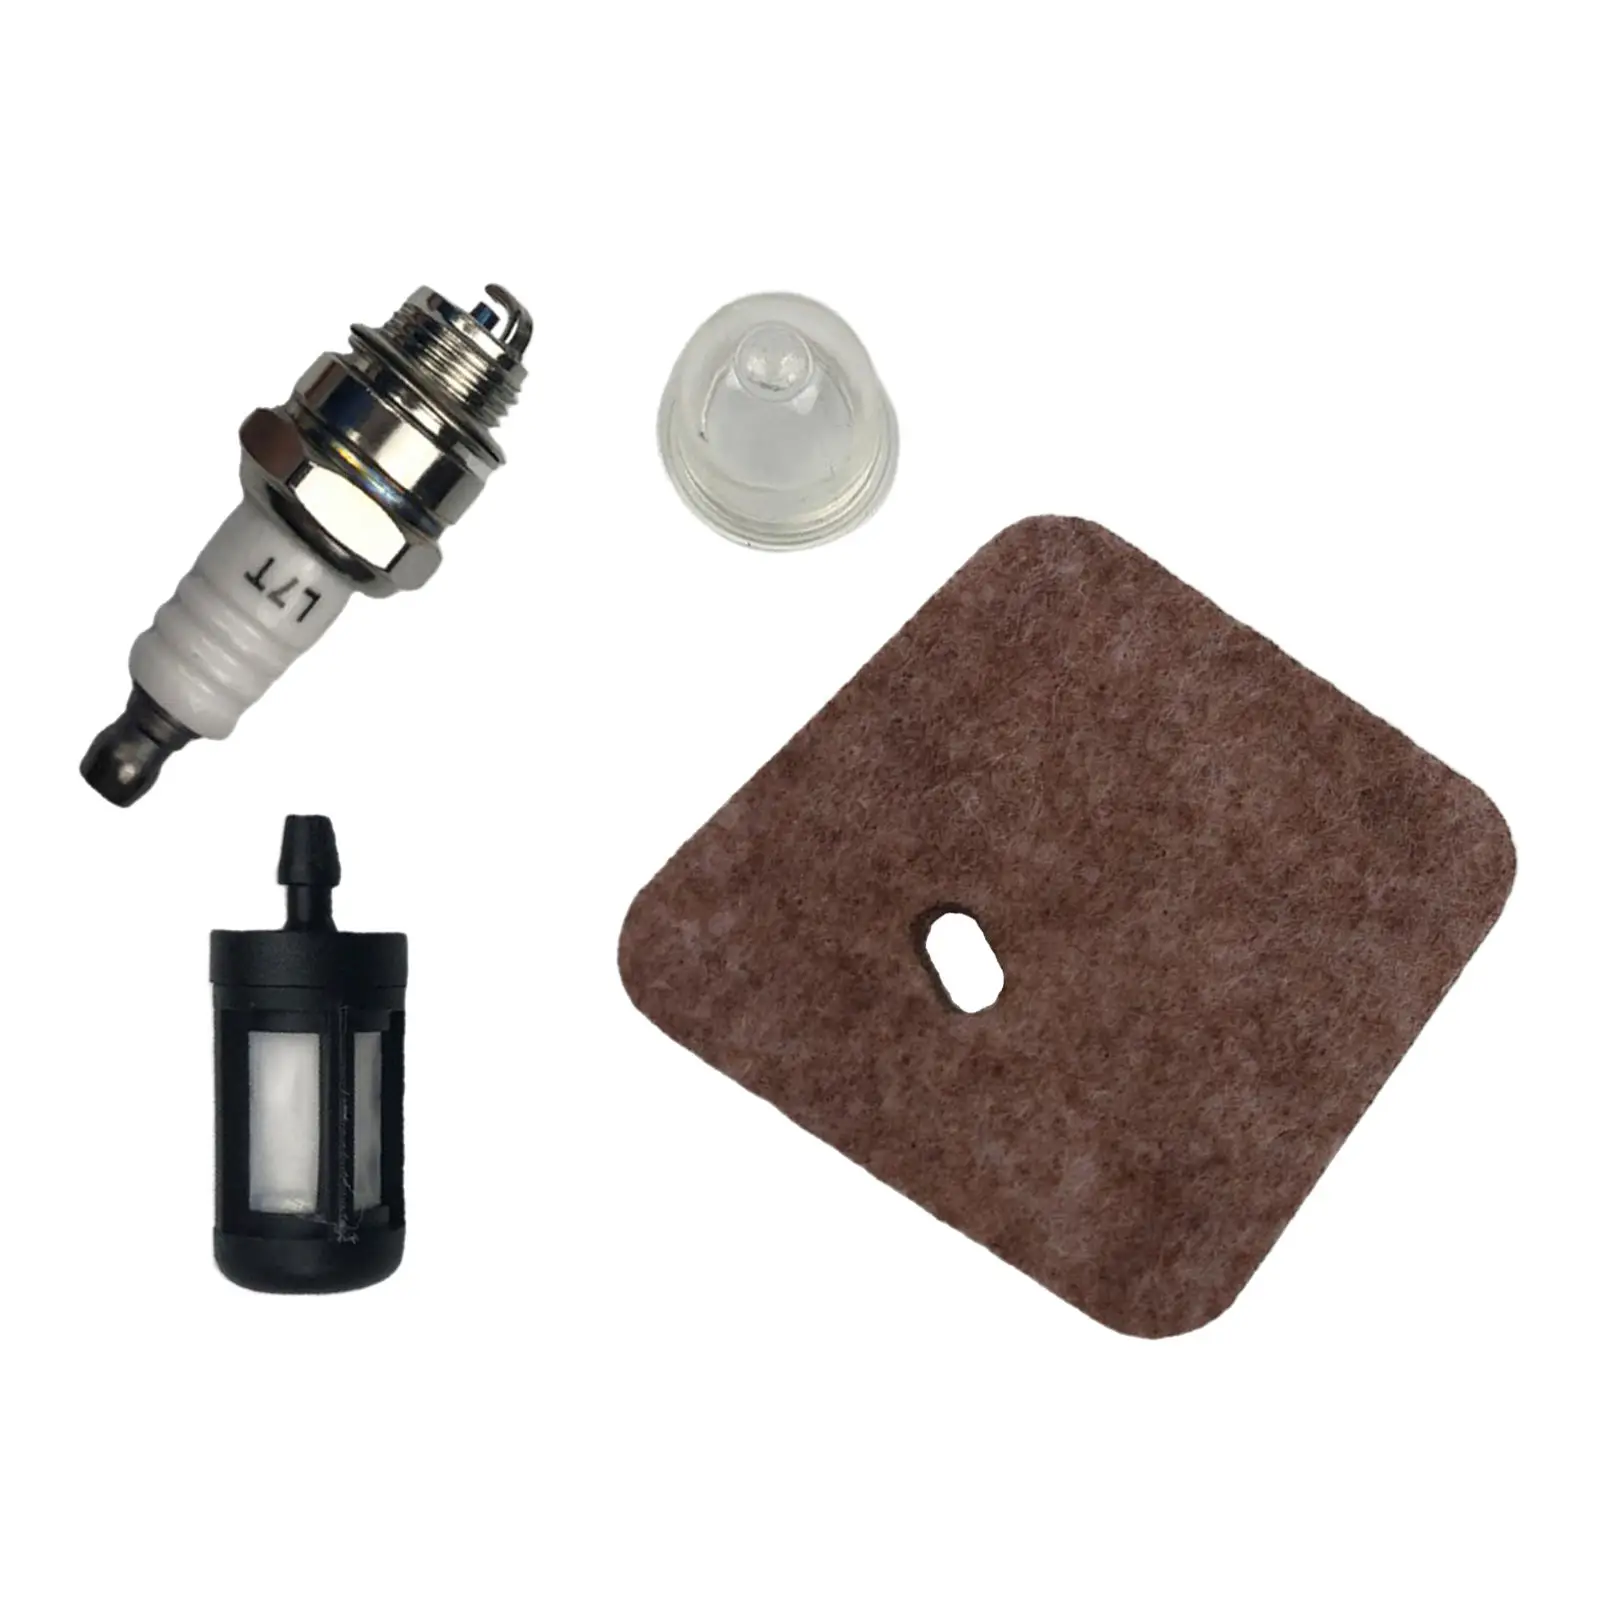 FS38 HS45 FS55 FS45 KM55 Trimmer Parts Details about   Air Filter & Air Filter Cover For Stihl 